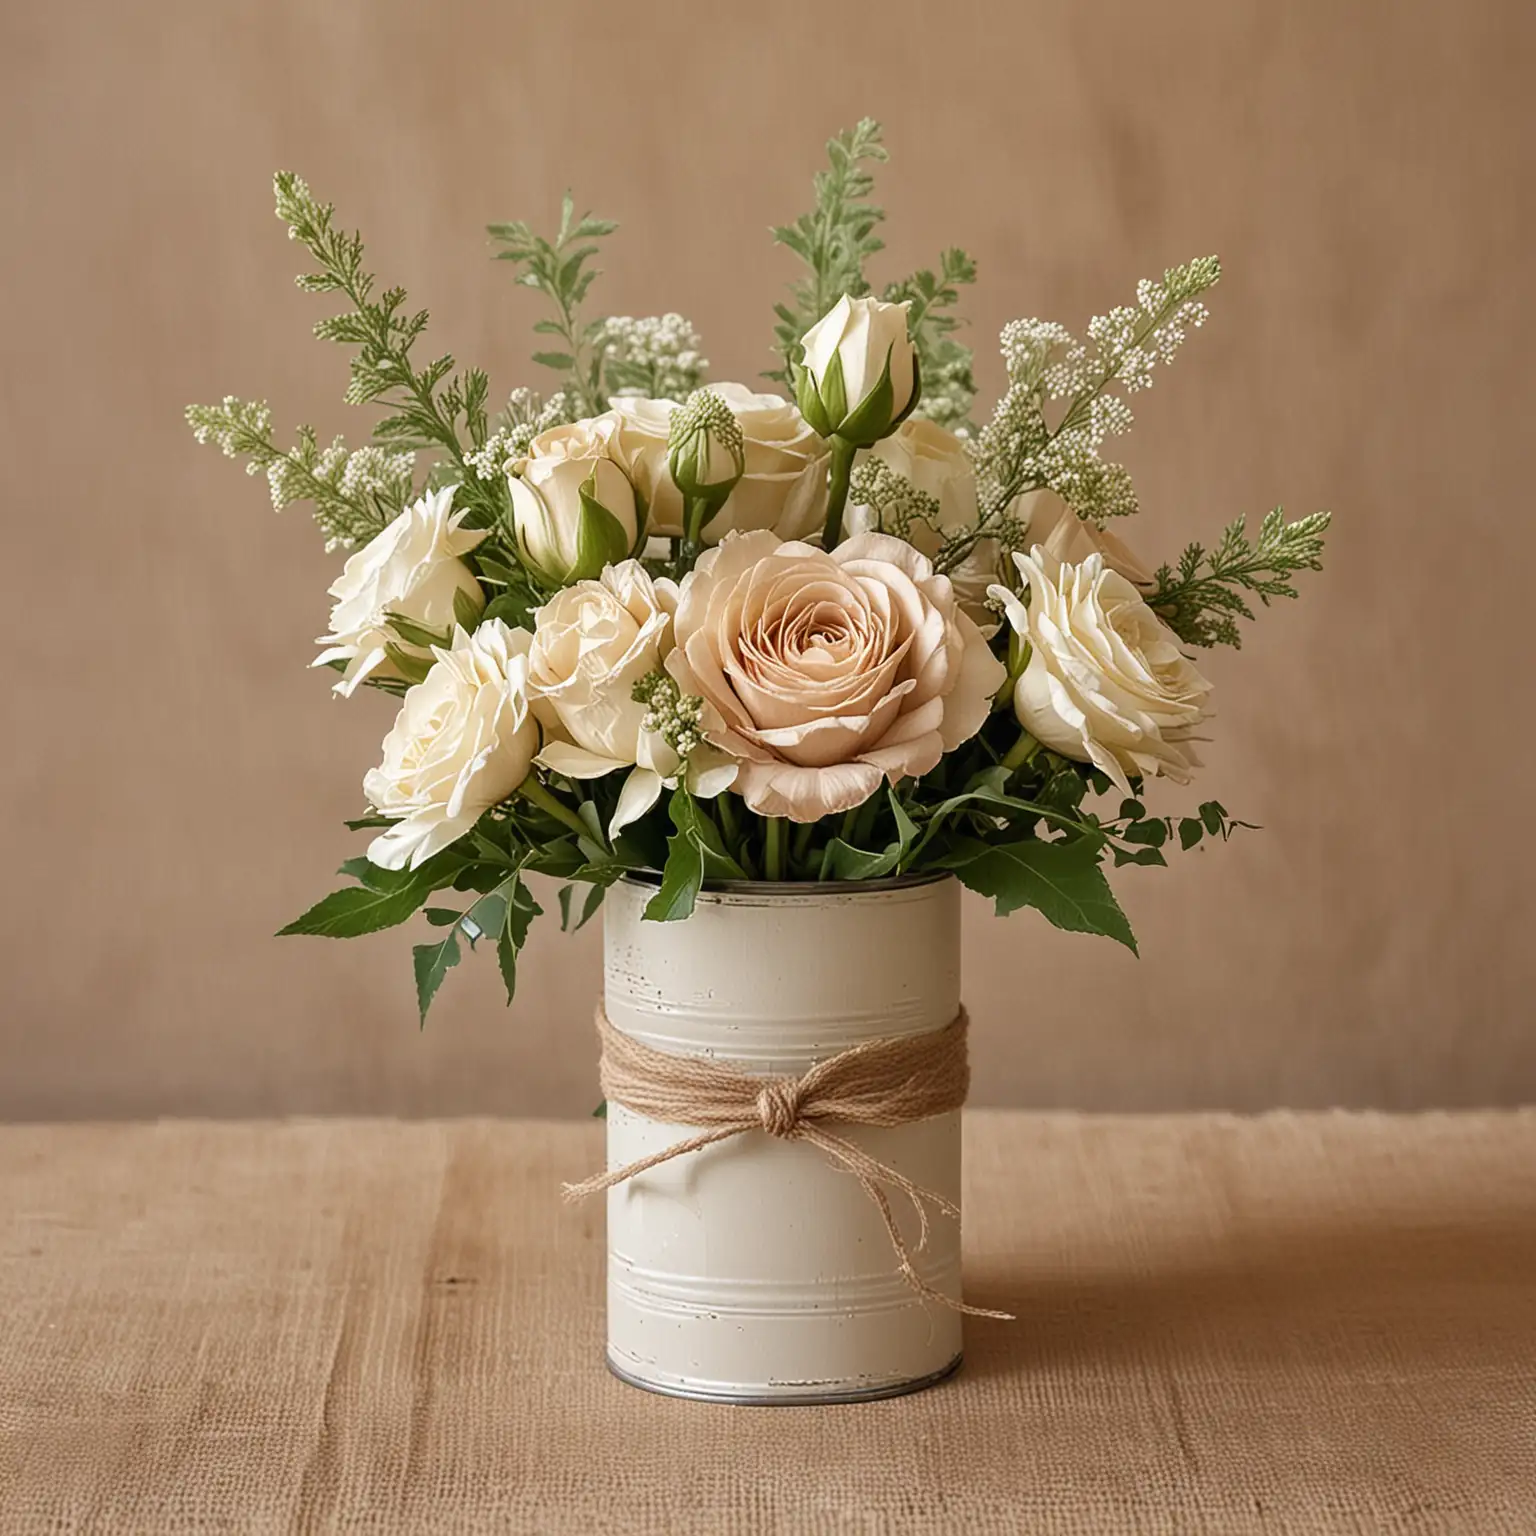 Rustic-Tin-Can-Vase-Wedding-Centerpiece-with-Neutral-Bouquet